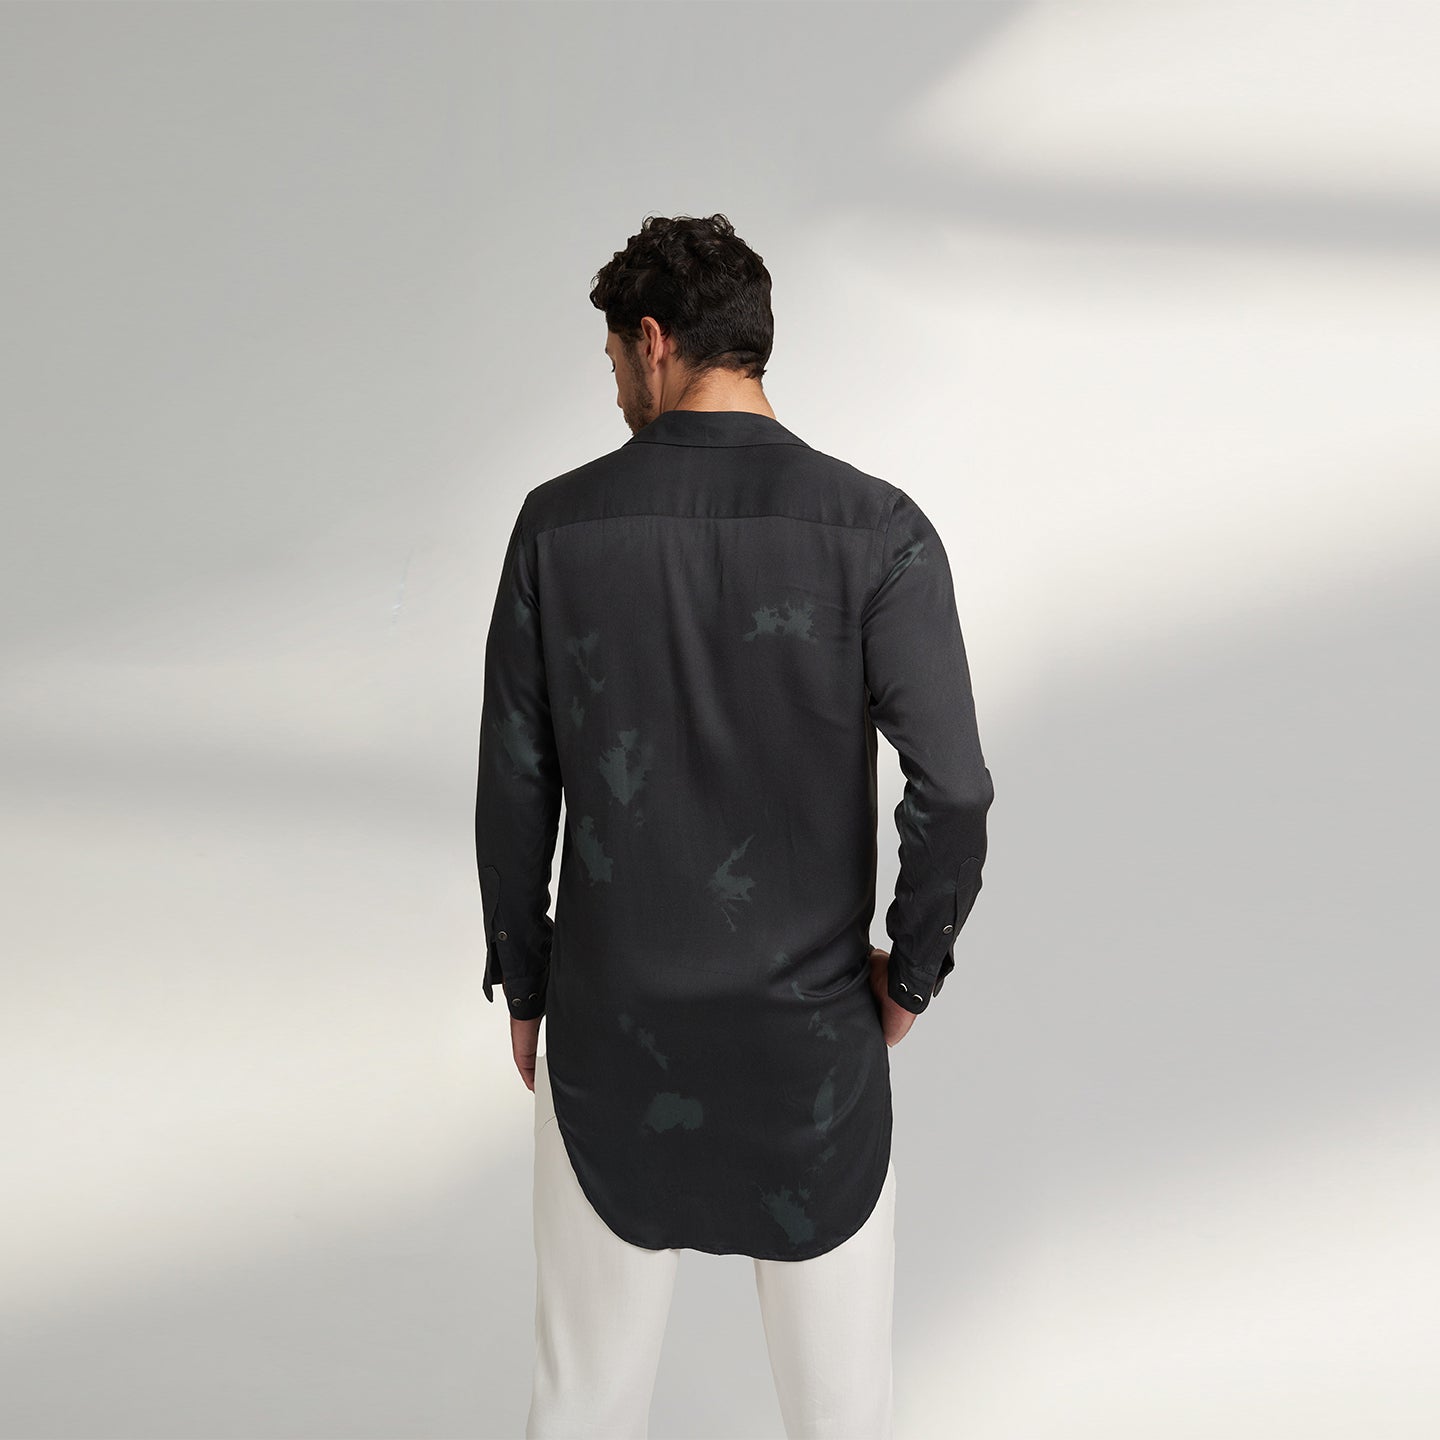 back of a man wearing a black shirt and white pants